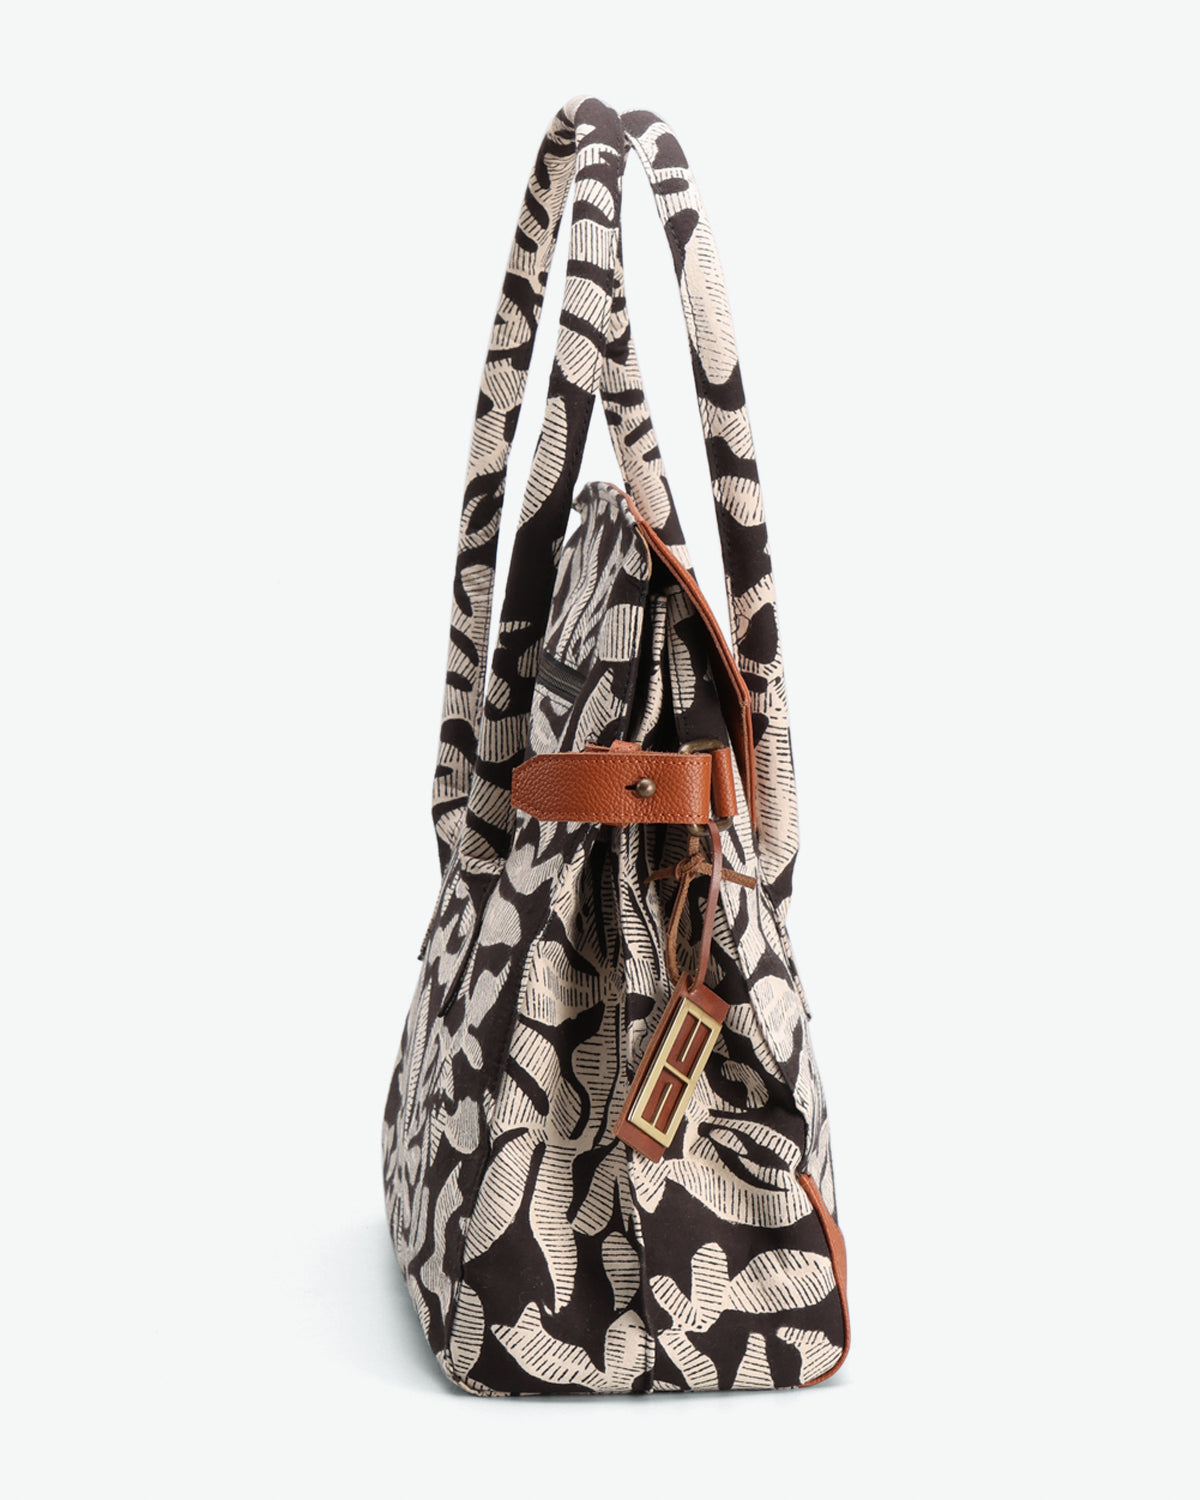 ABSTRACT FLORAL  HAND BAG